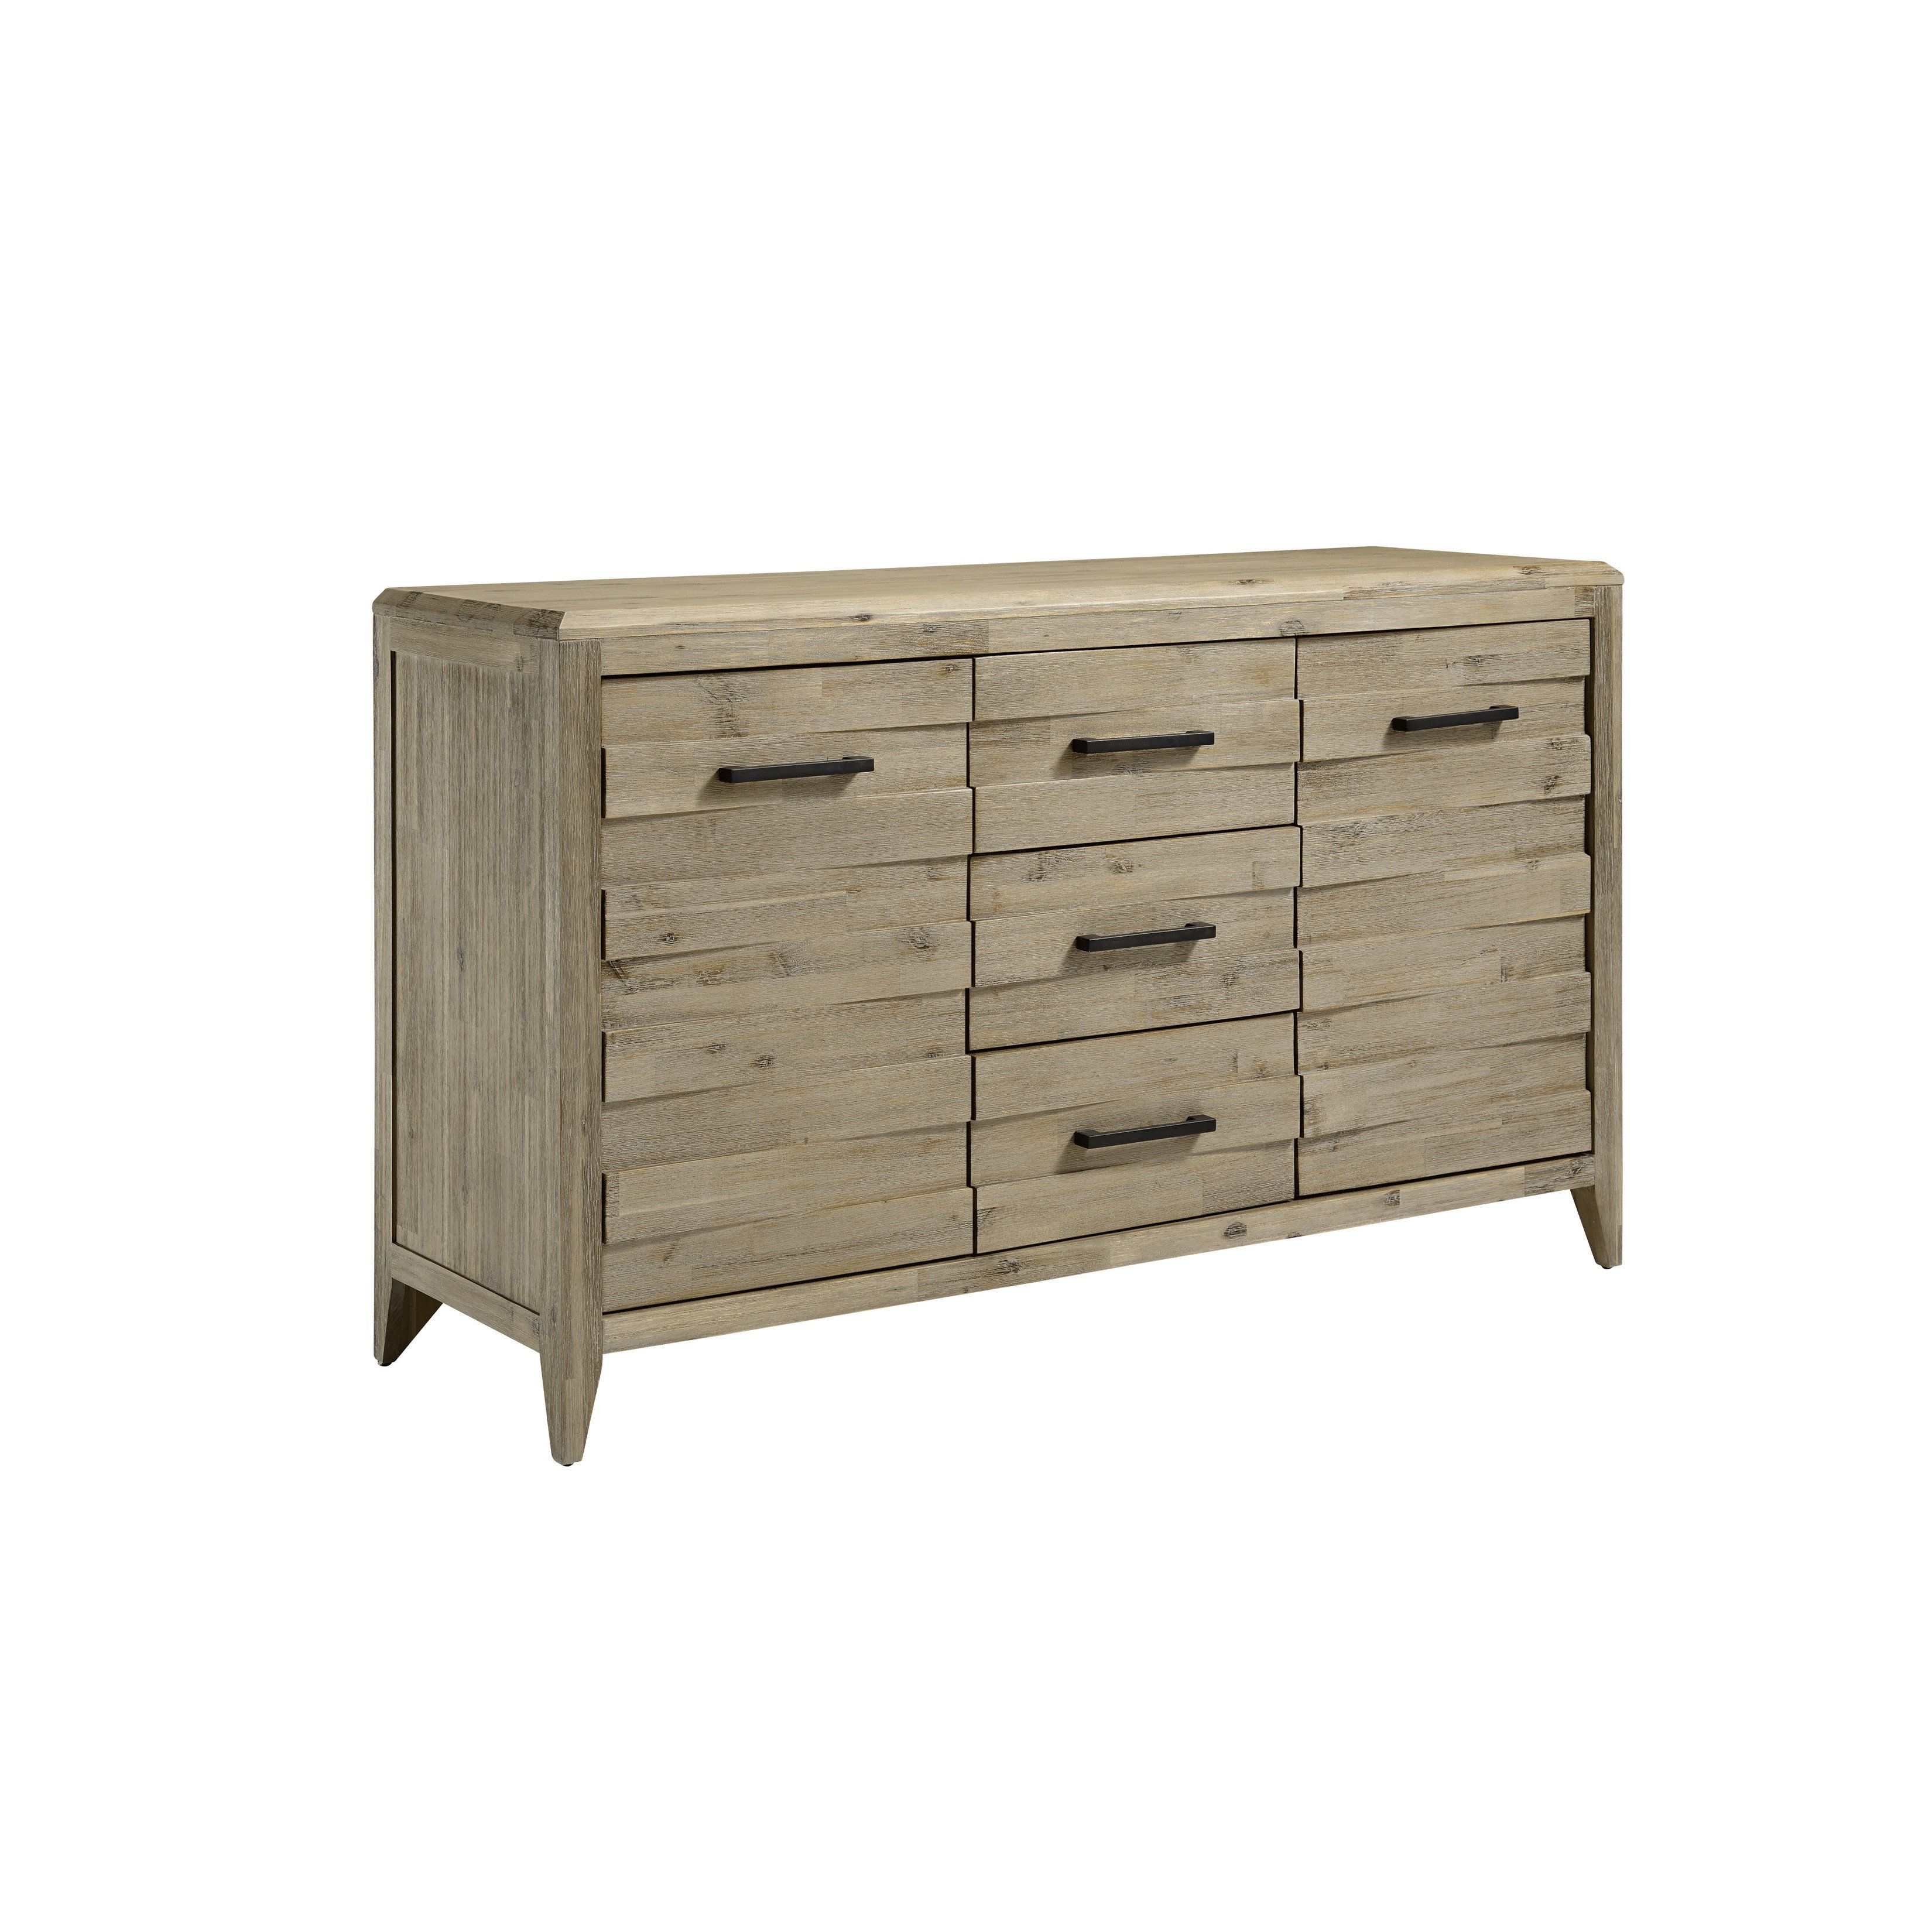 Shop Harbourside 3 Drawer 2 Door Sideboard – On Sale – Free Shipping Pertaining To Aged Pine 3 Drawer 2 Door Sideboards (View 6 of 30)